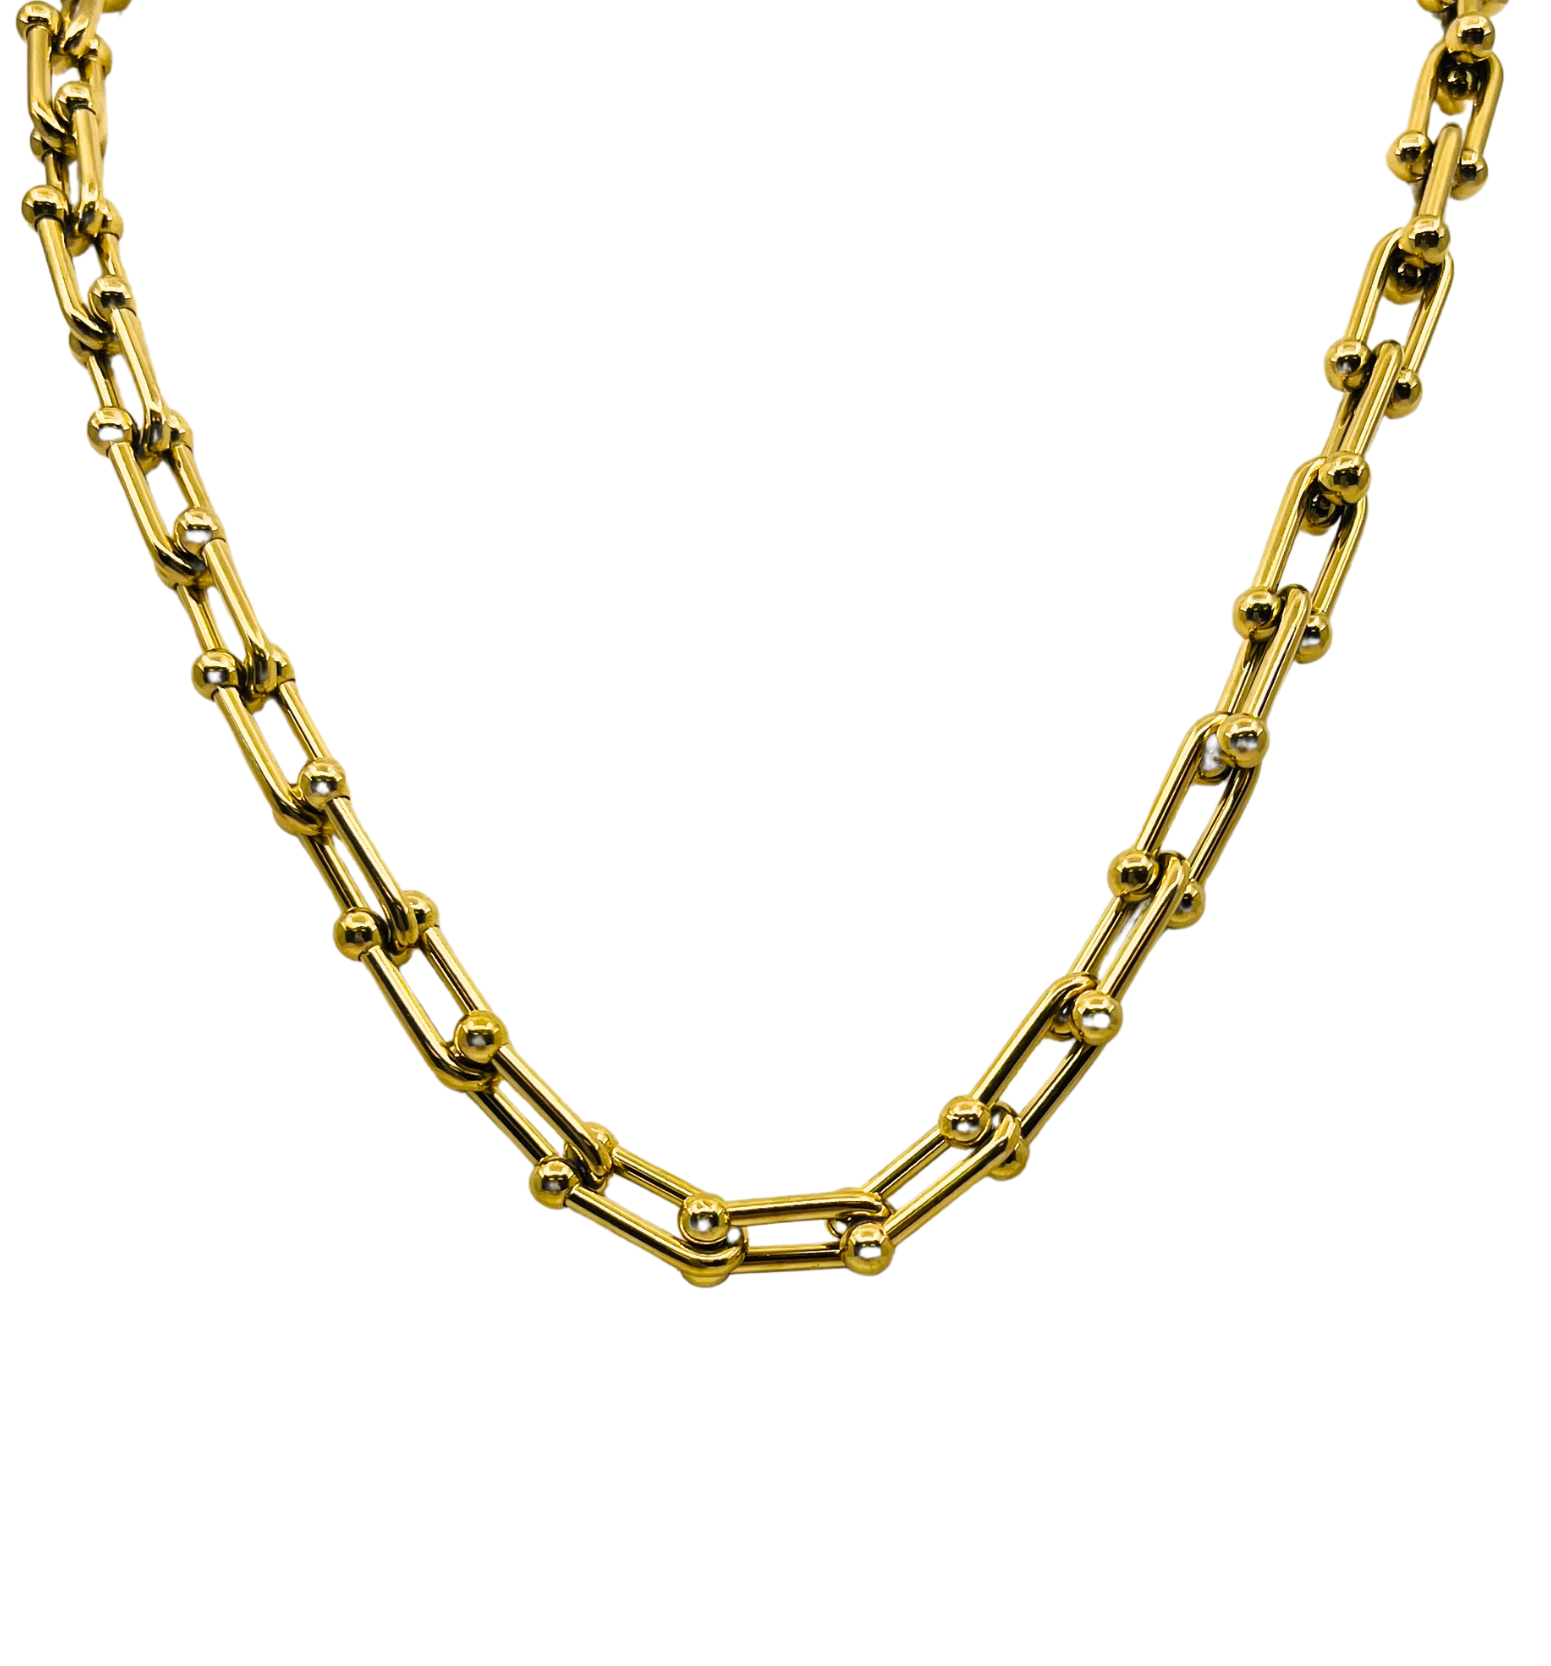 The Gold Double Ball Link Necklace